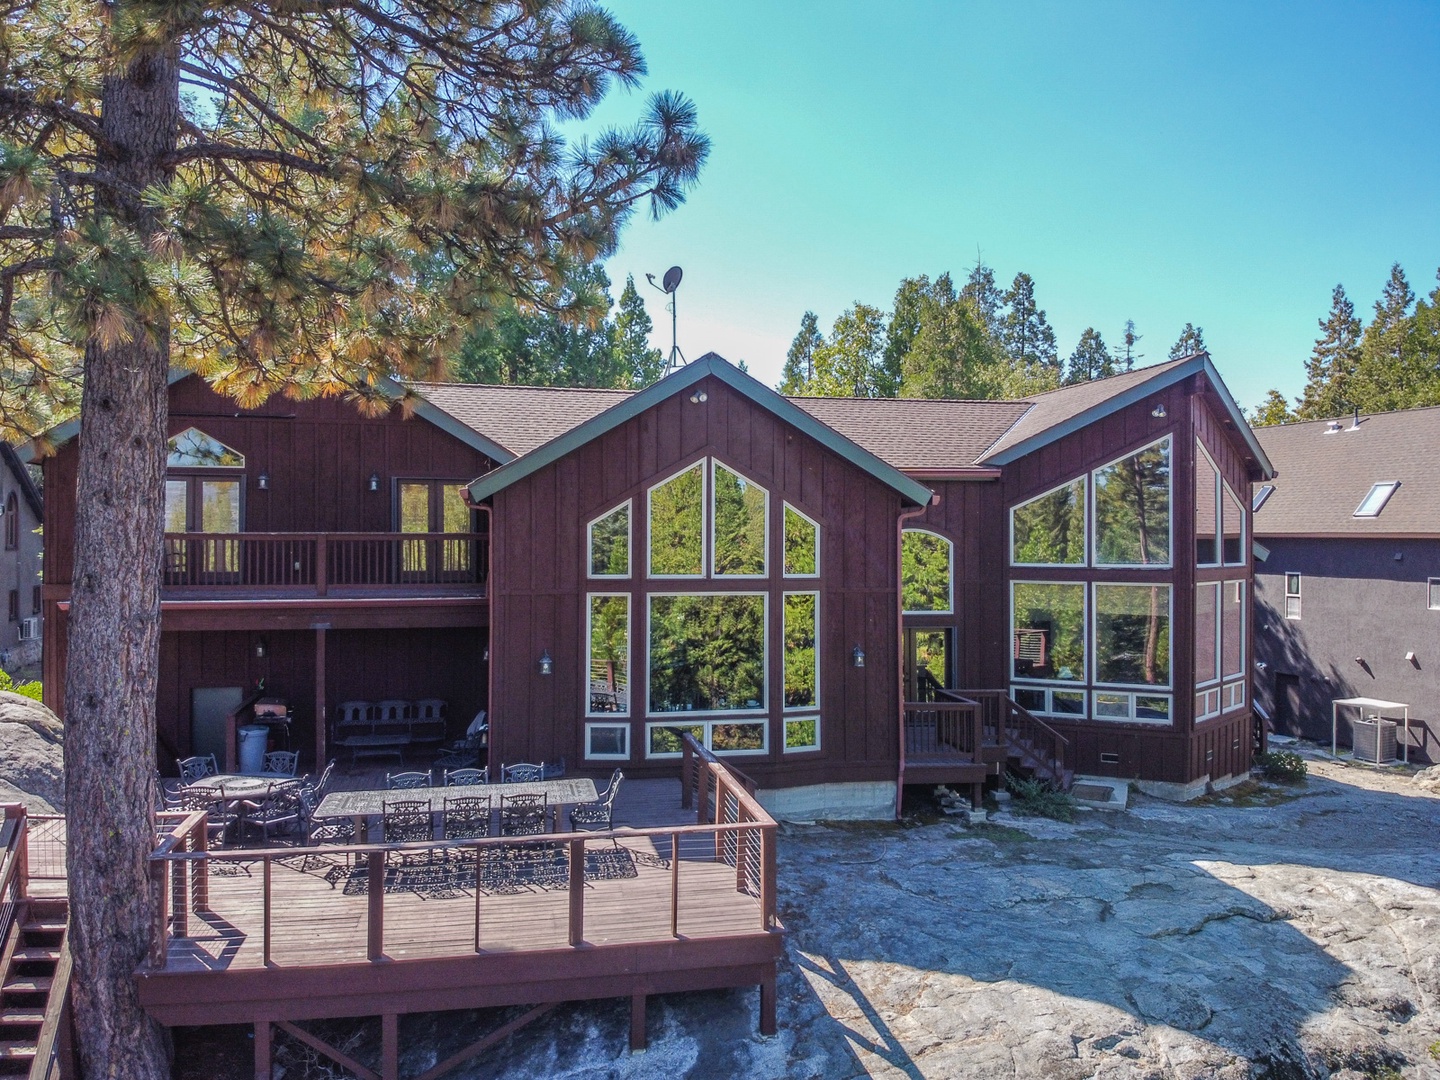 This exceptional home is sure to impress during your visit to Shaver Lake